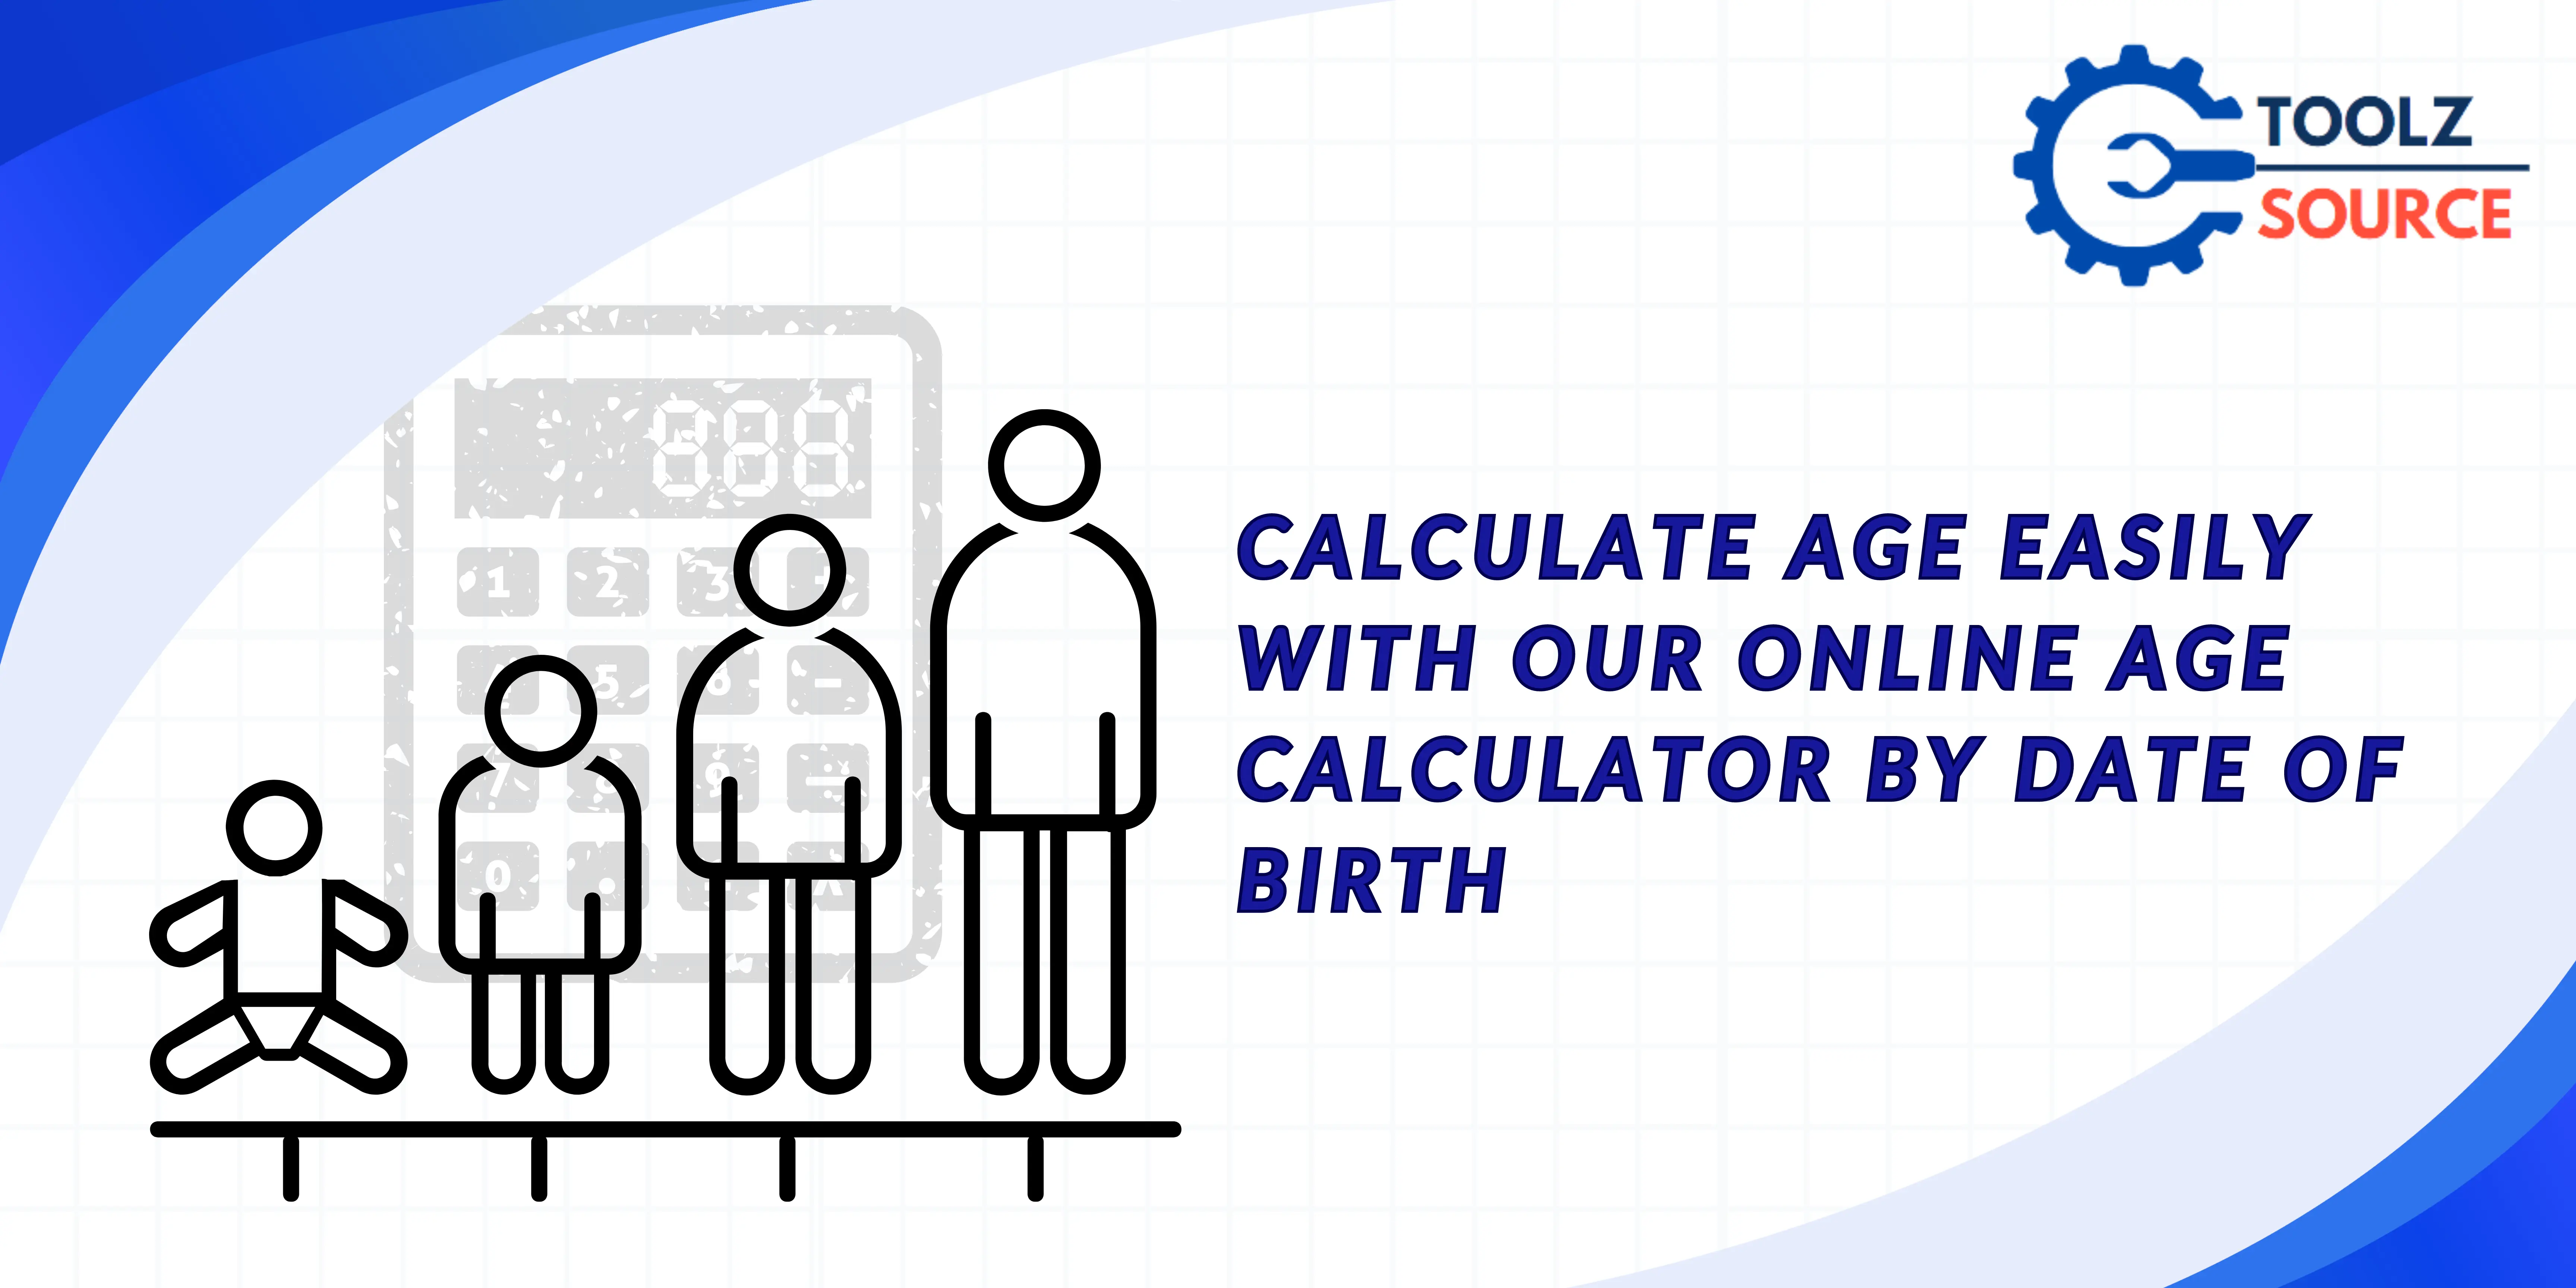 Calculate Age Easily with Our Online Age Calculator by Date of Birth